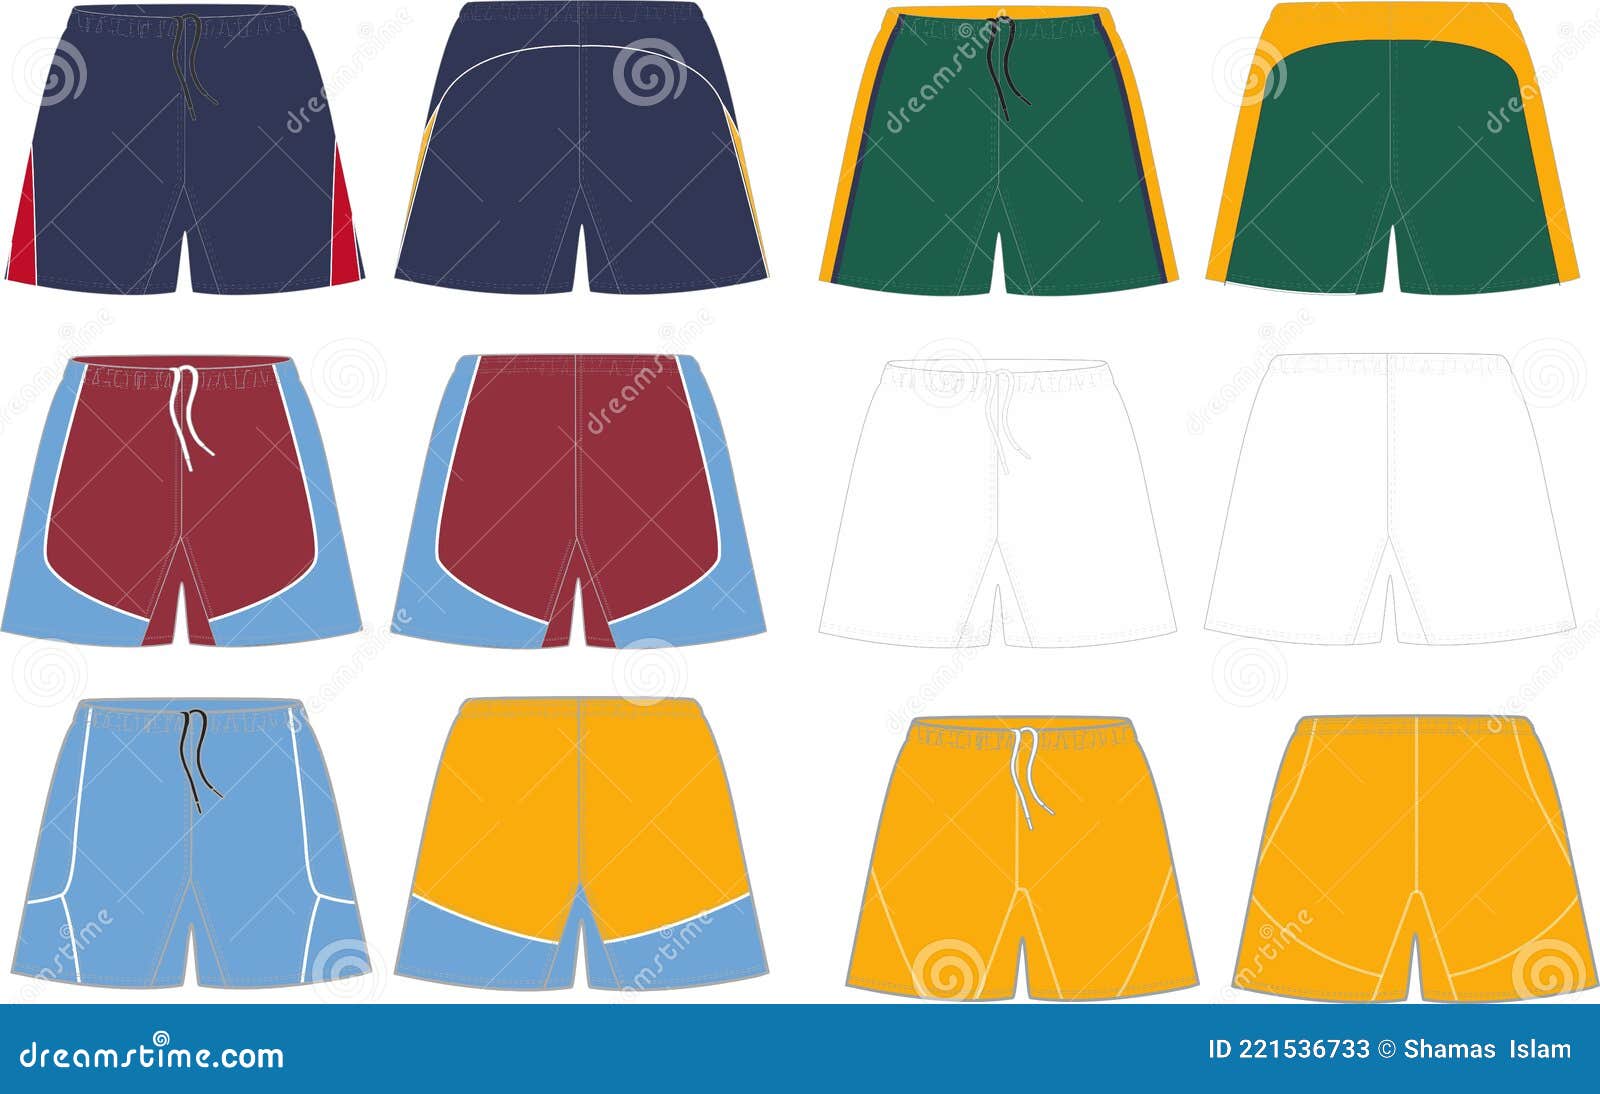 Rugby Shorts Mock Ups Templates Vectors Stock Vector - Illustration of ...